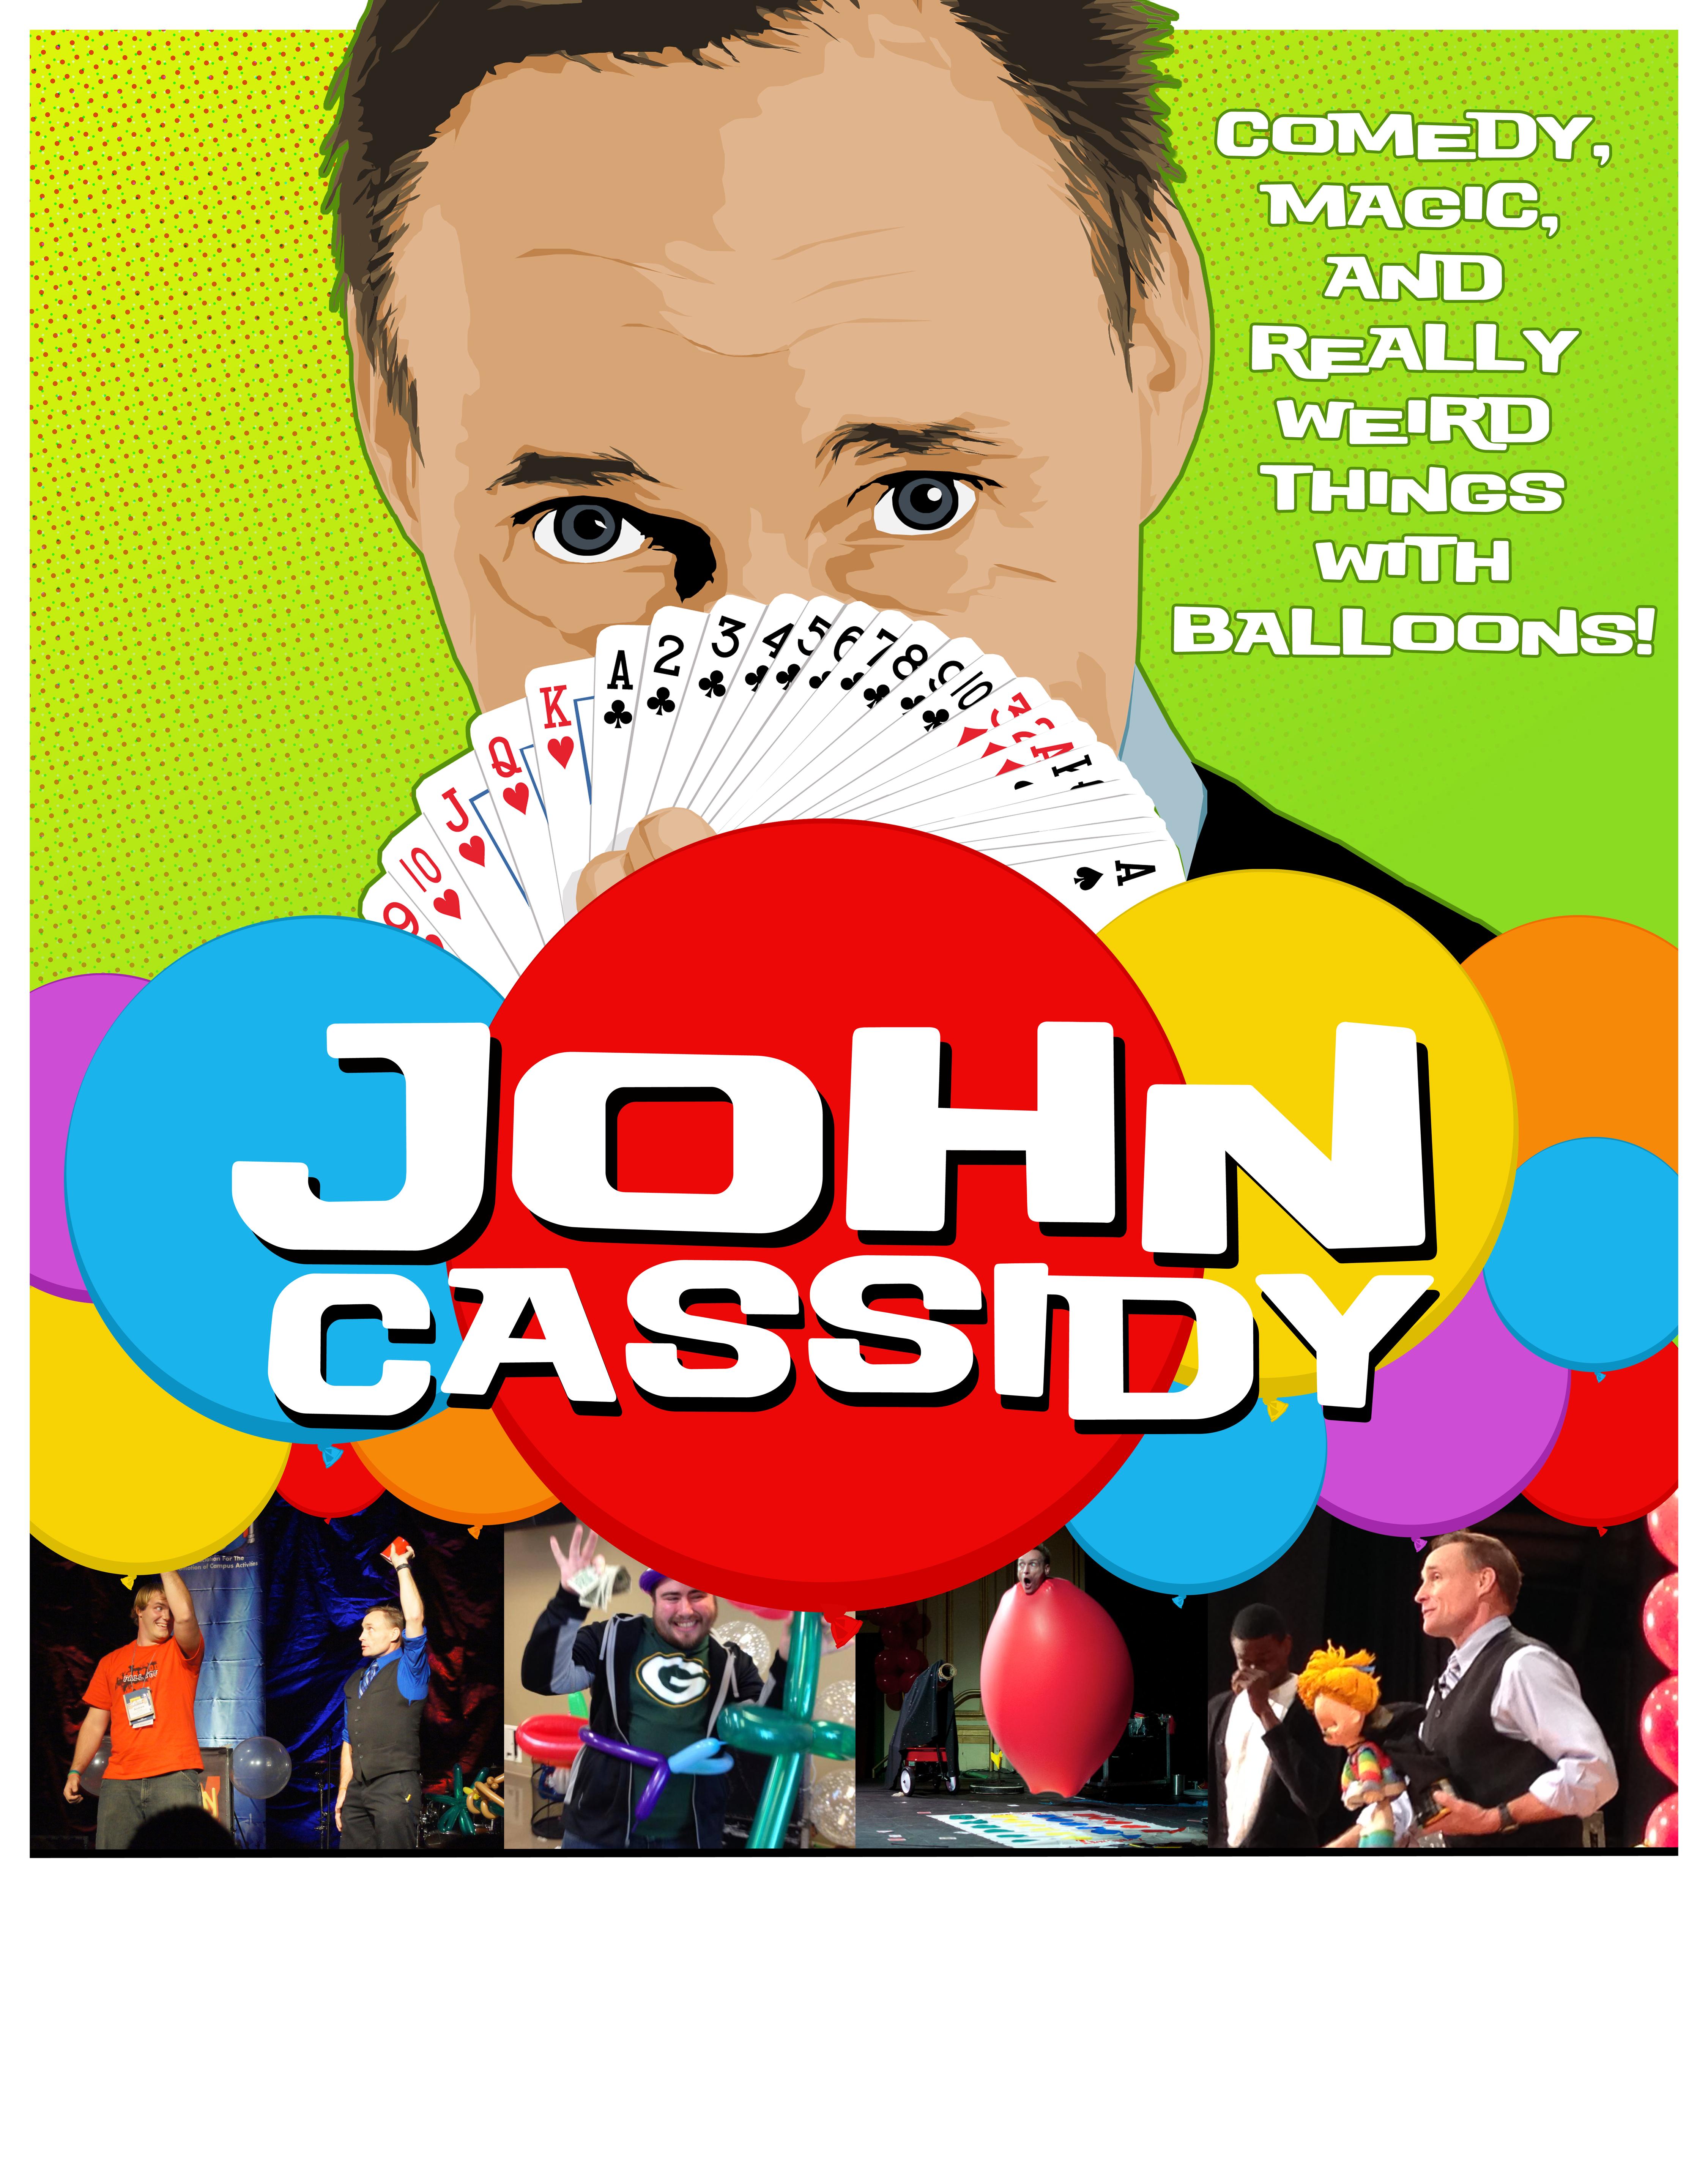 Spring Picnic featuring Comedian, Magician John Cassidy